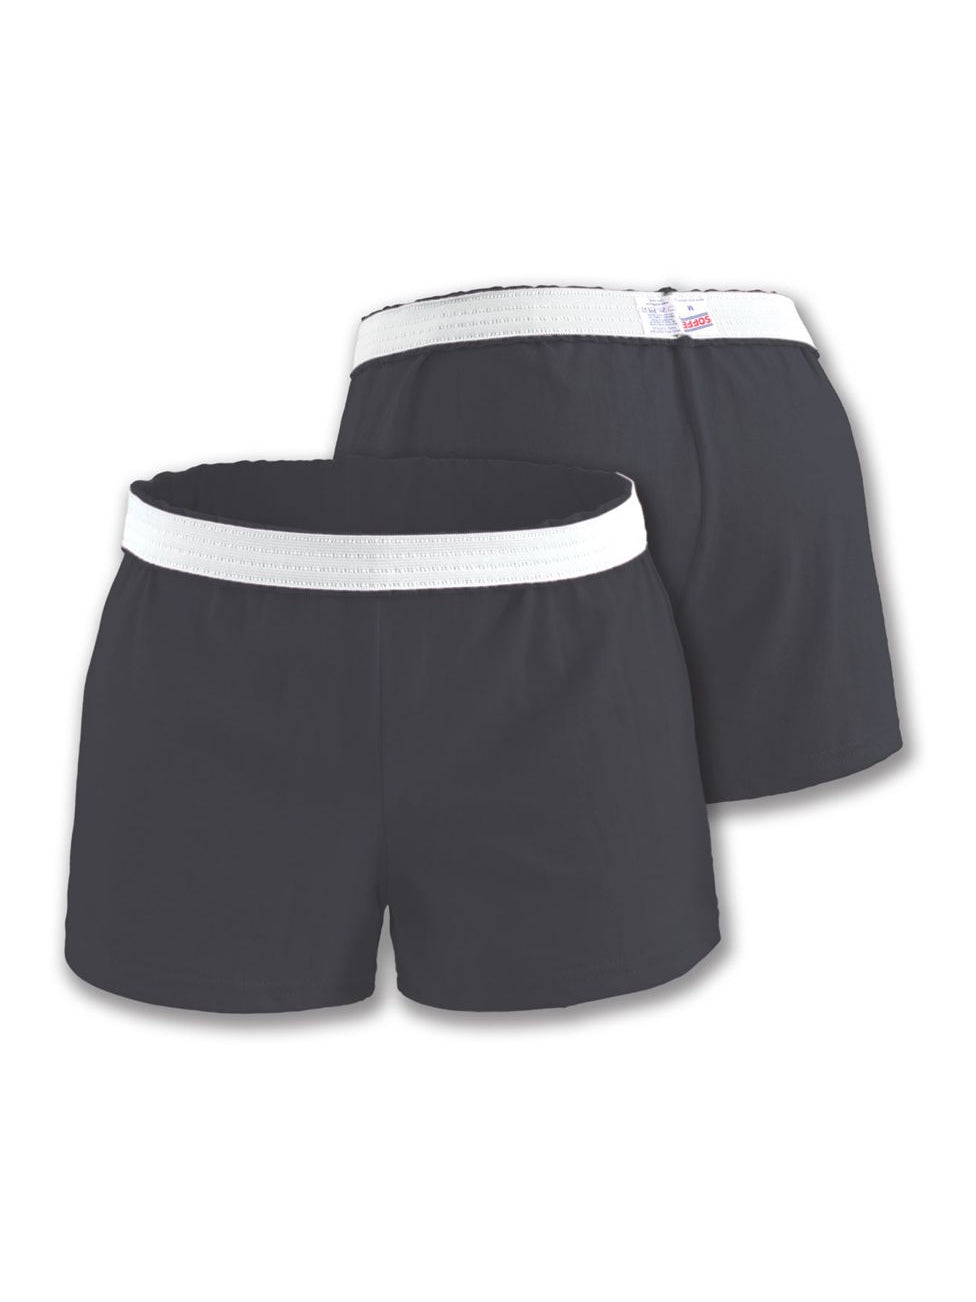 Little Girls Shorts The Authentic Short